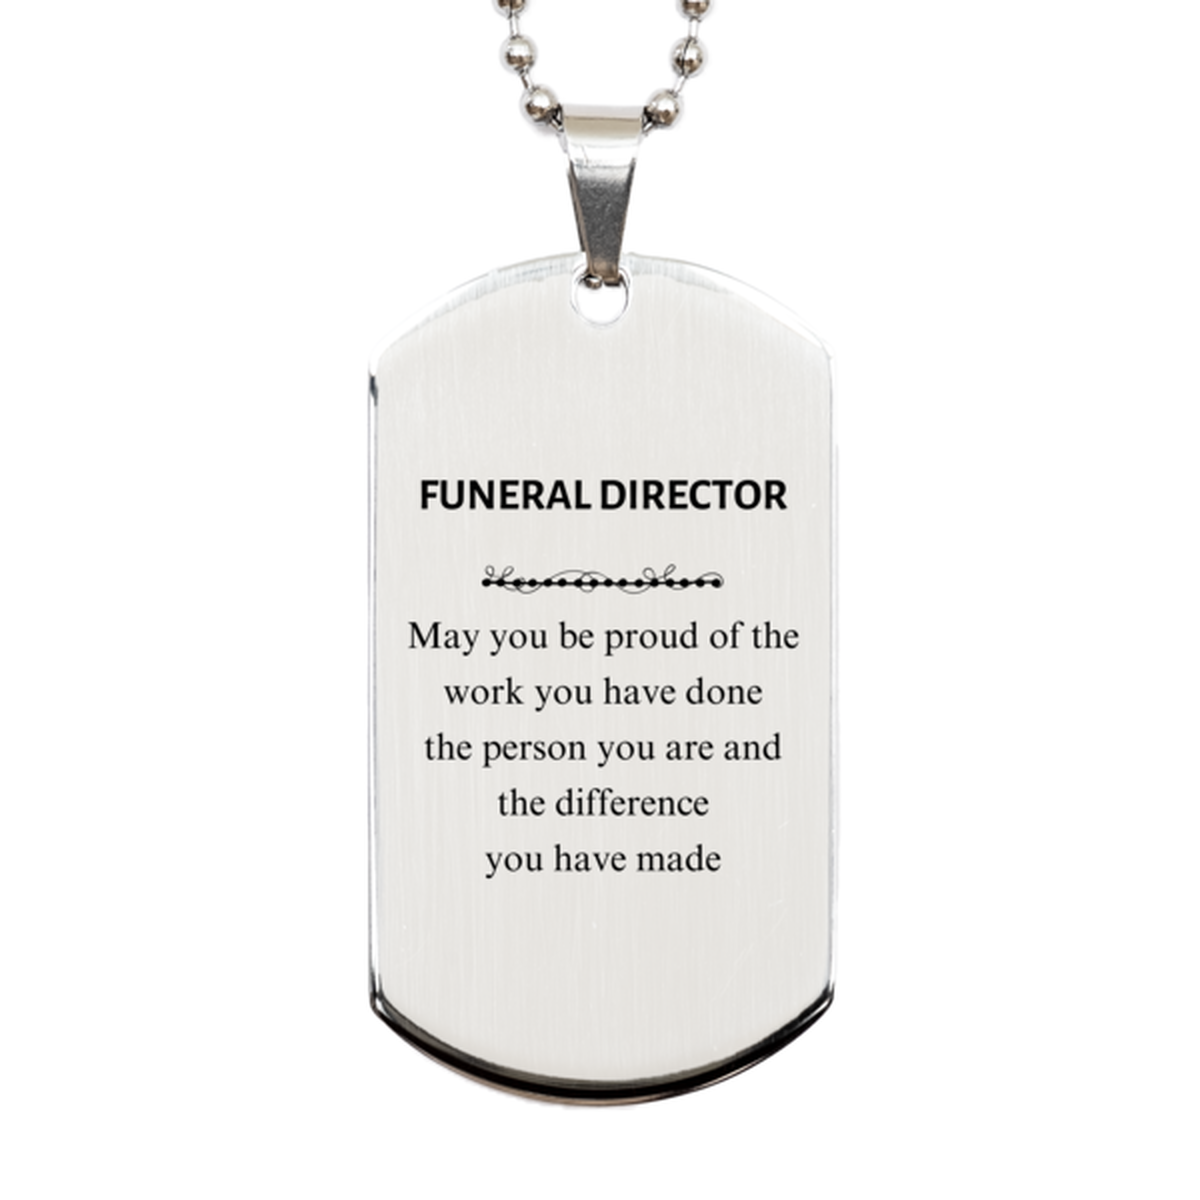 Funeral Director May you be proud of the work you have done, Retirement Funeral Director Silver Dog Tag for Colleague Appreciation Gifts Amazing for Funeral Director